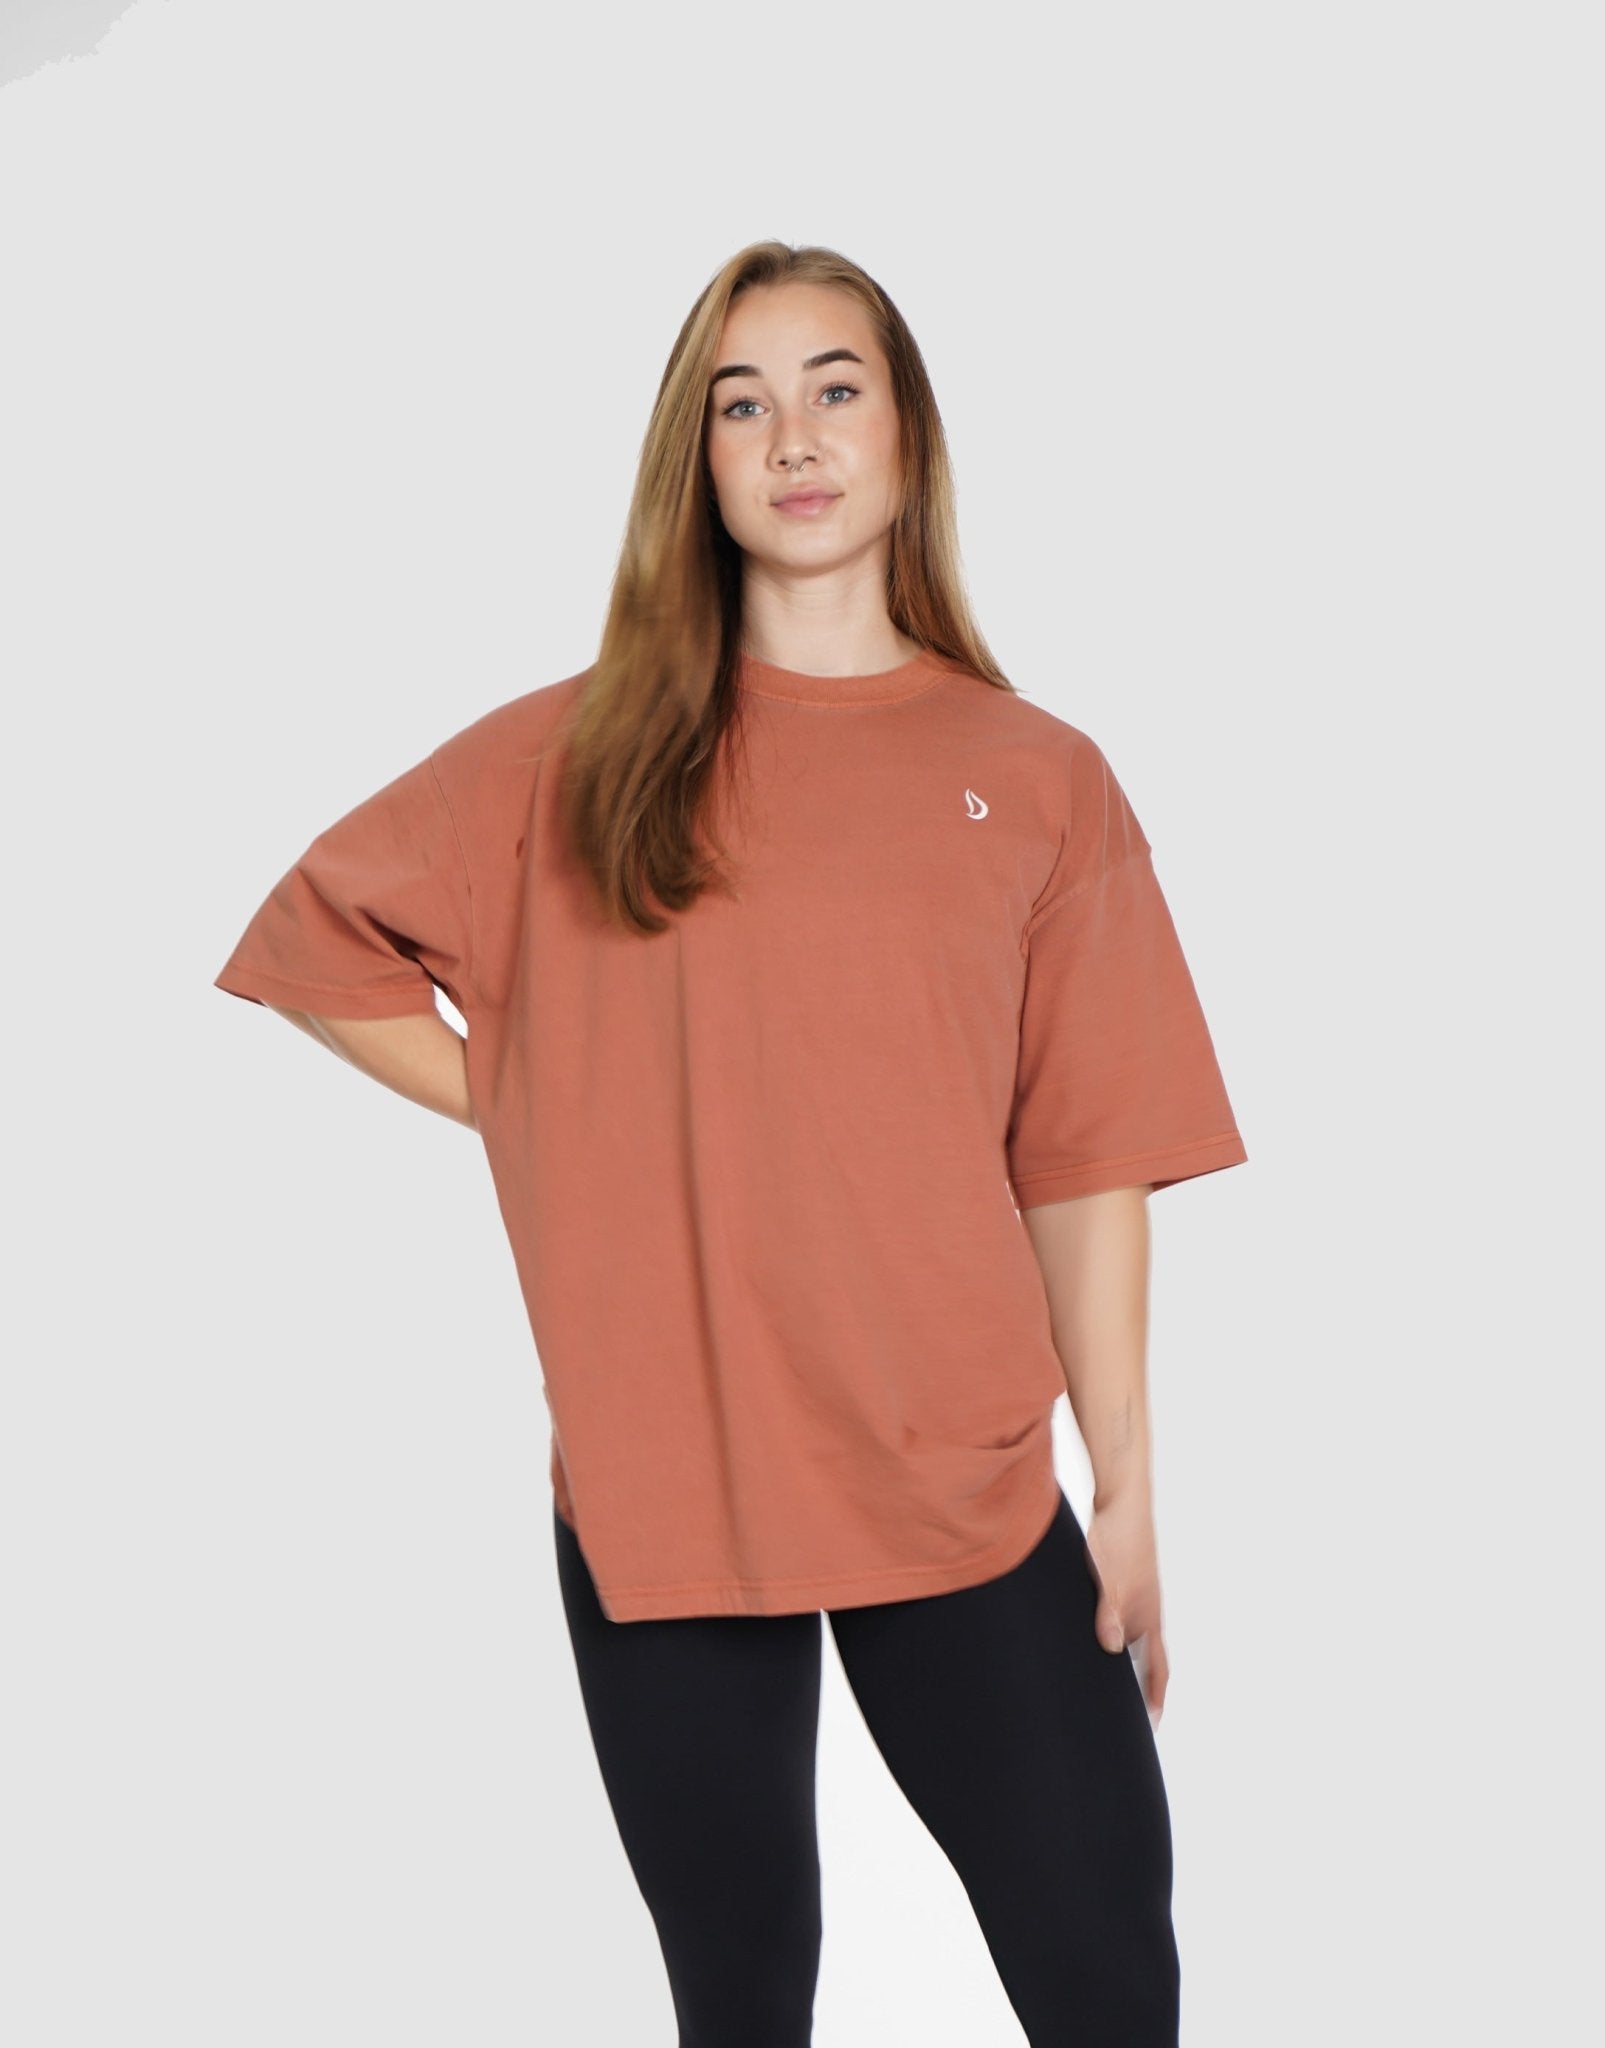 Its Giving Gym Oversized T-Shirt